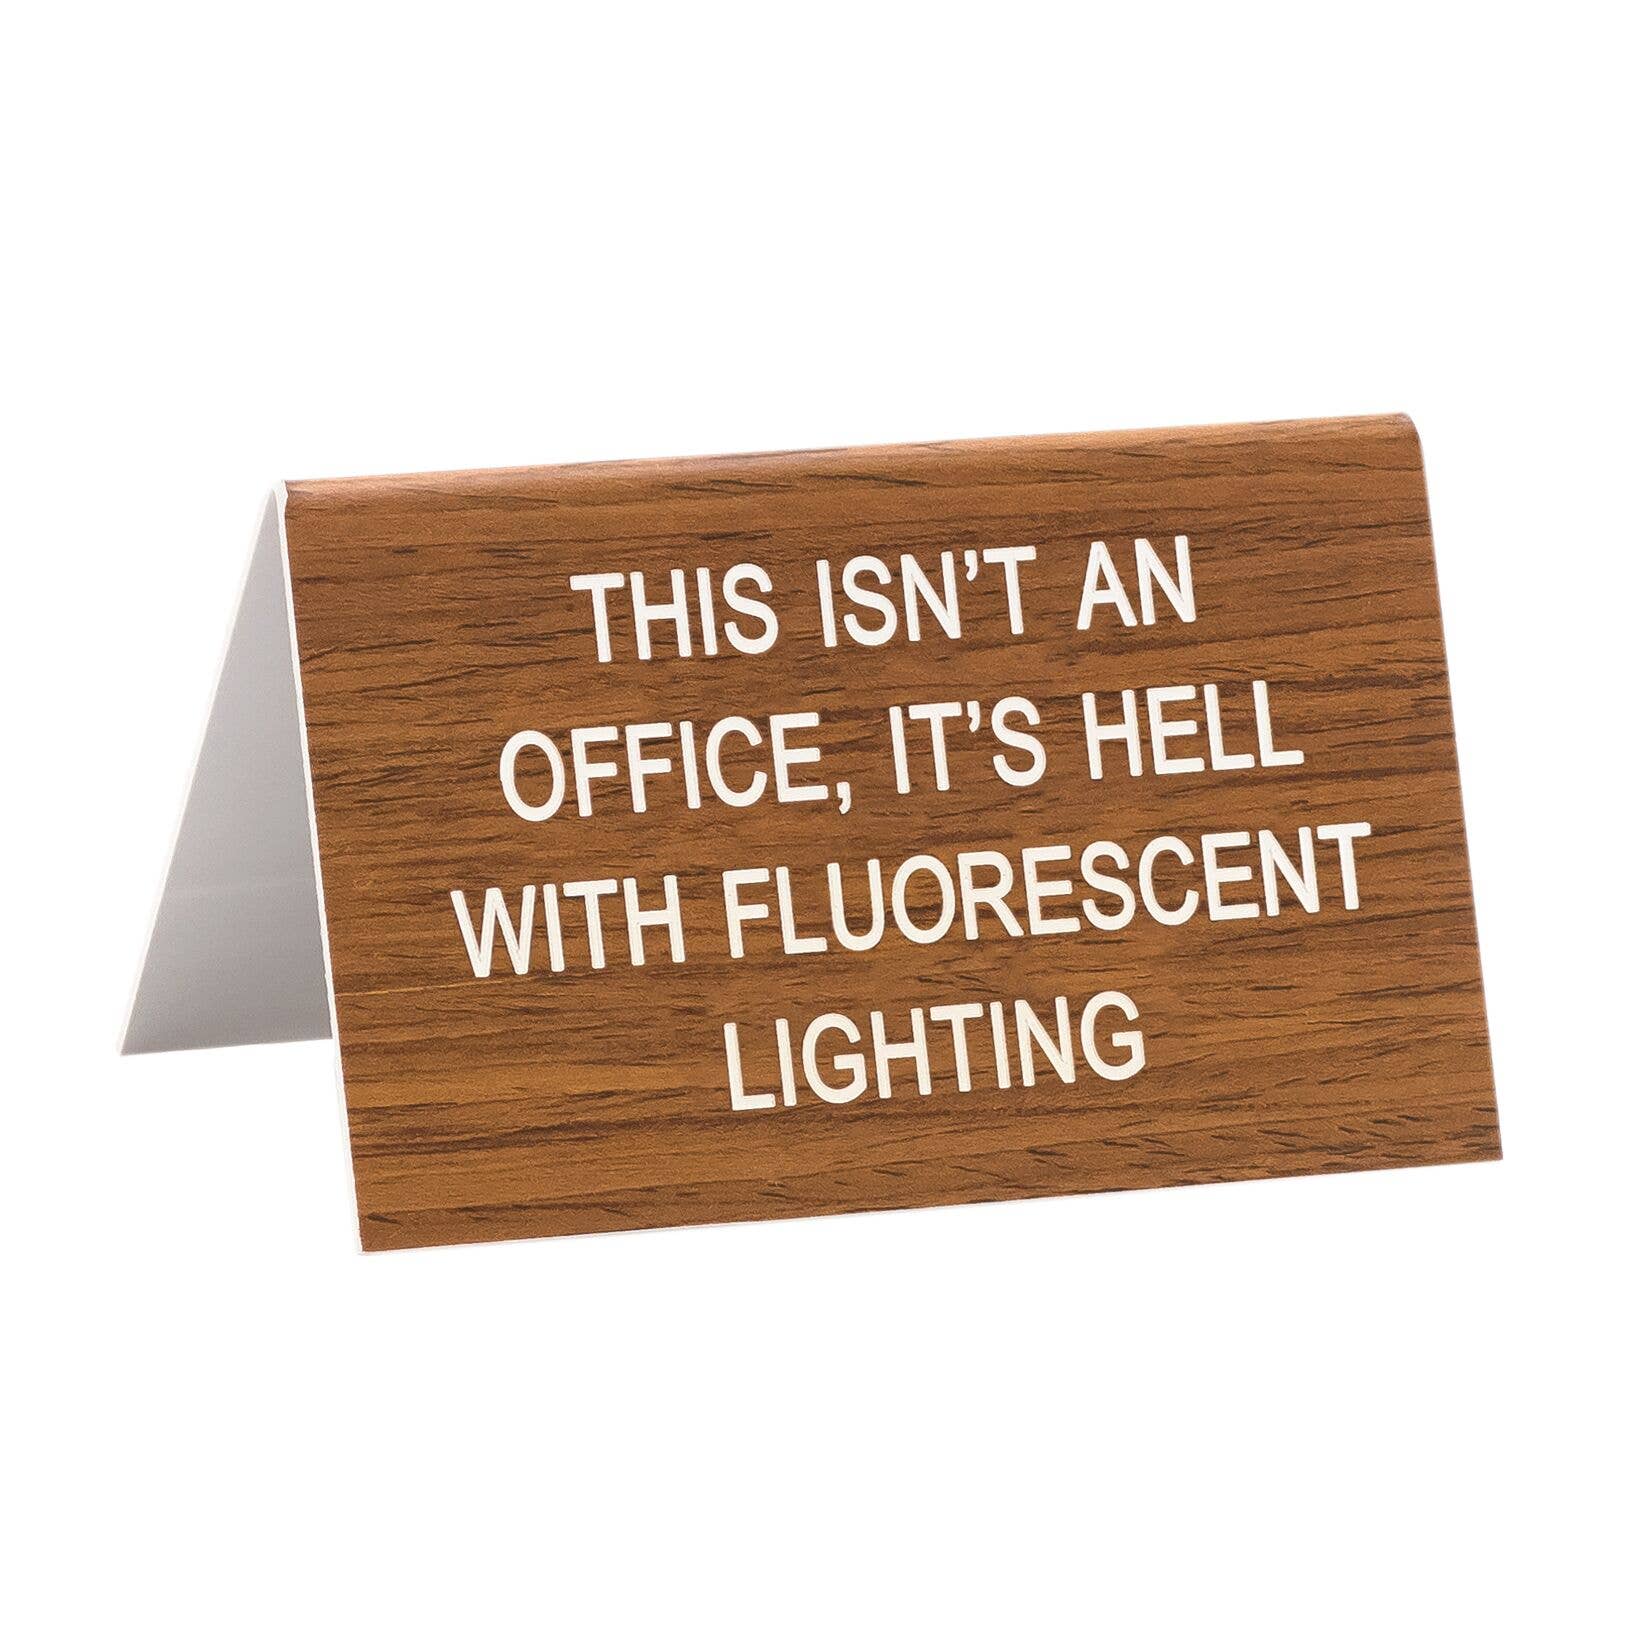 This Isn’t An Office, It’s Hell With Fluorescent Lighting Mini Desk Sign | Desk Decor Nameplate